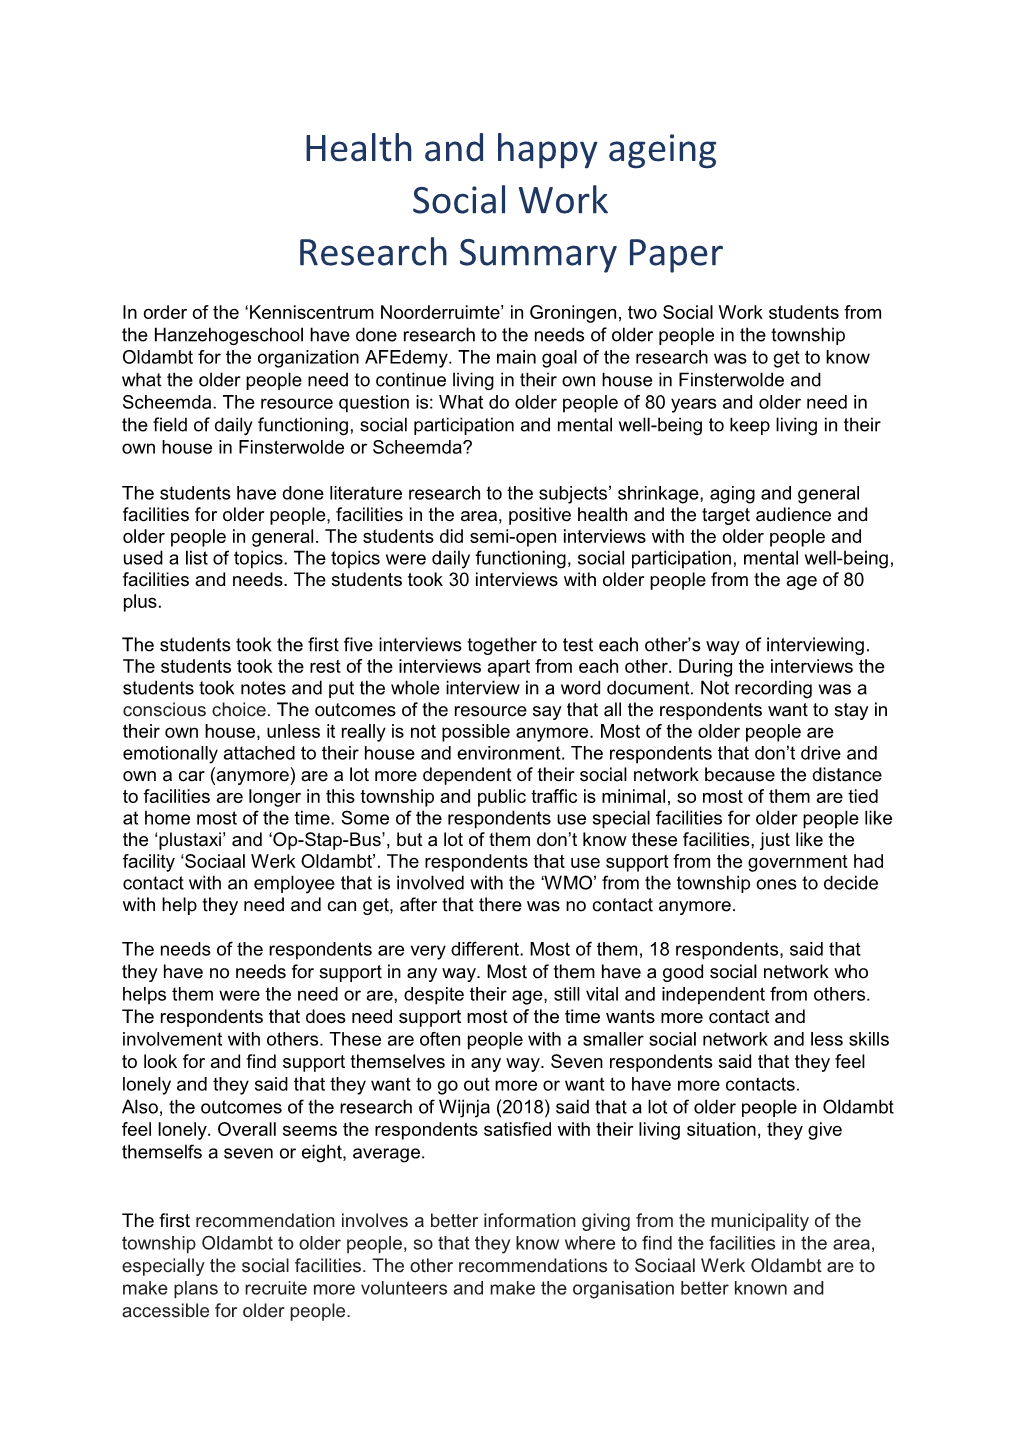 Social Work Research Summary Paper